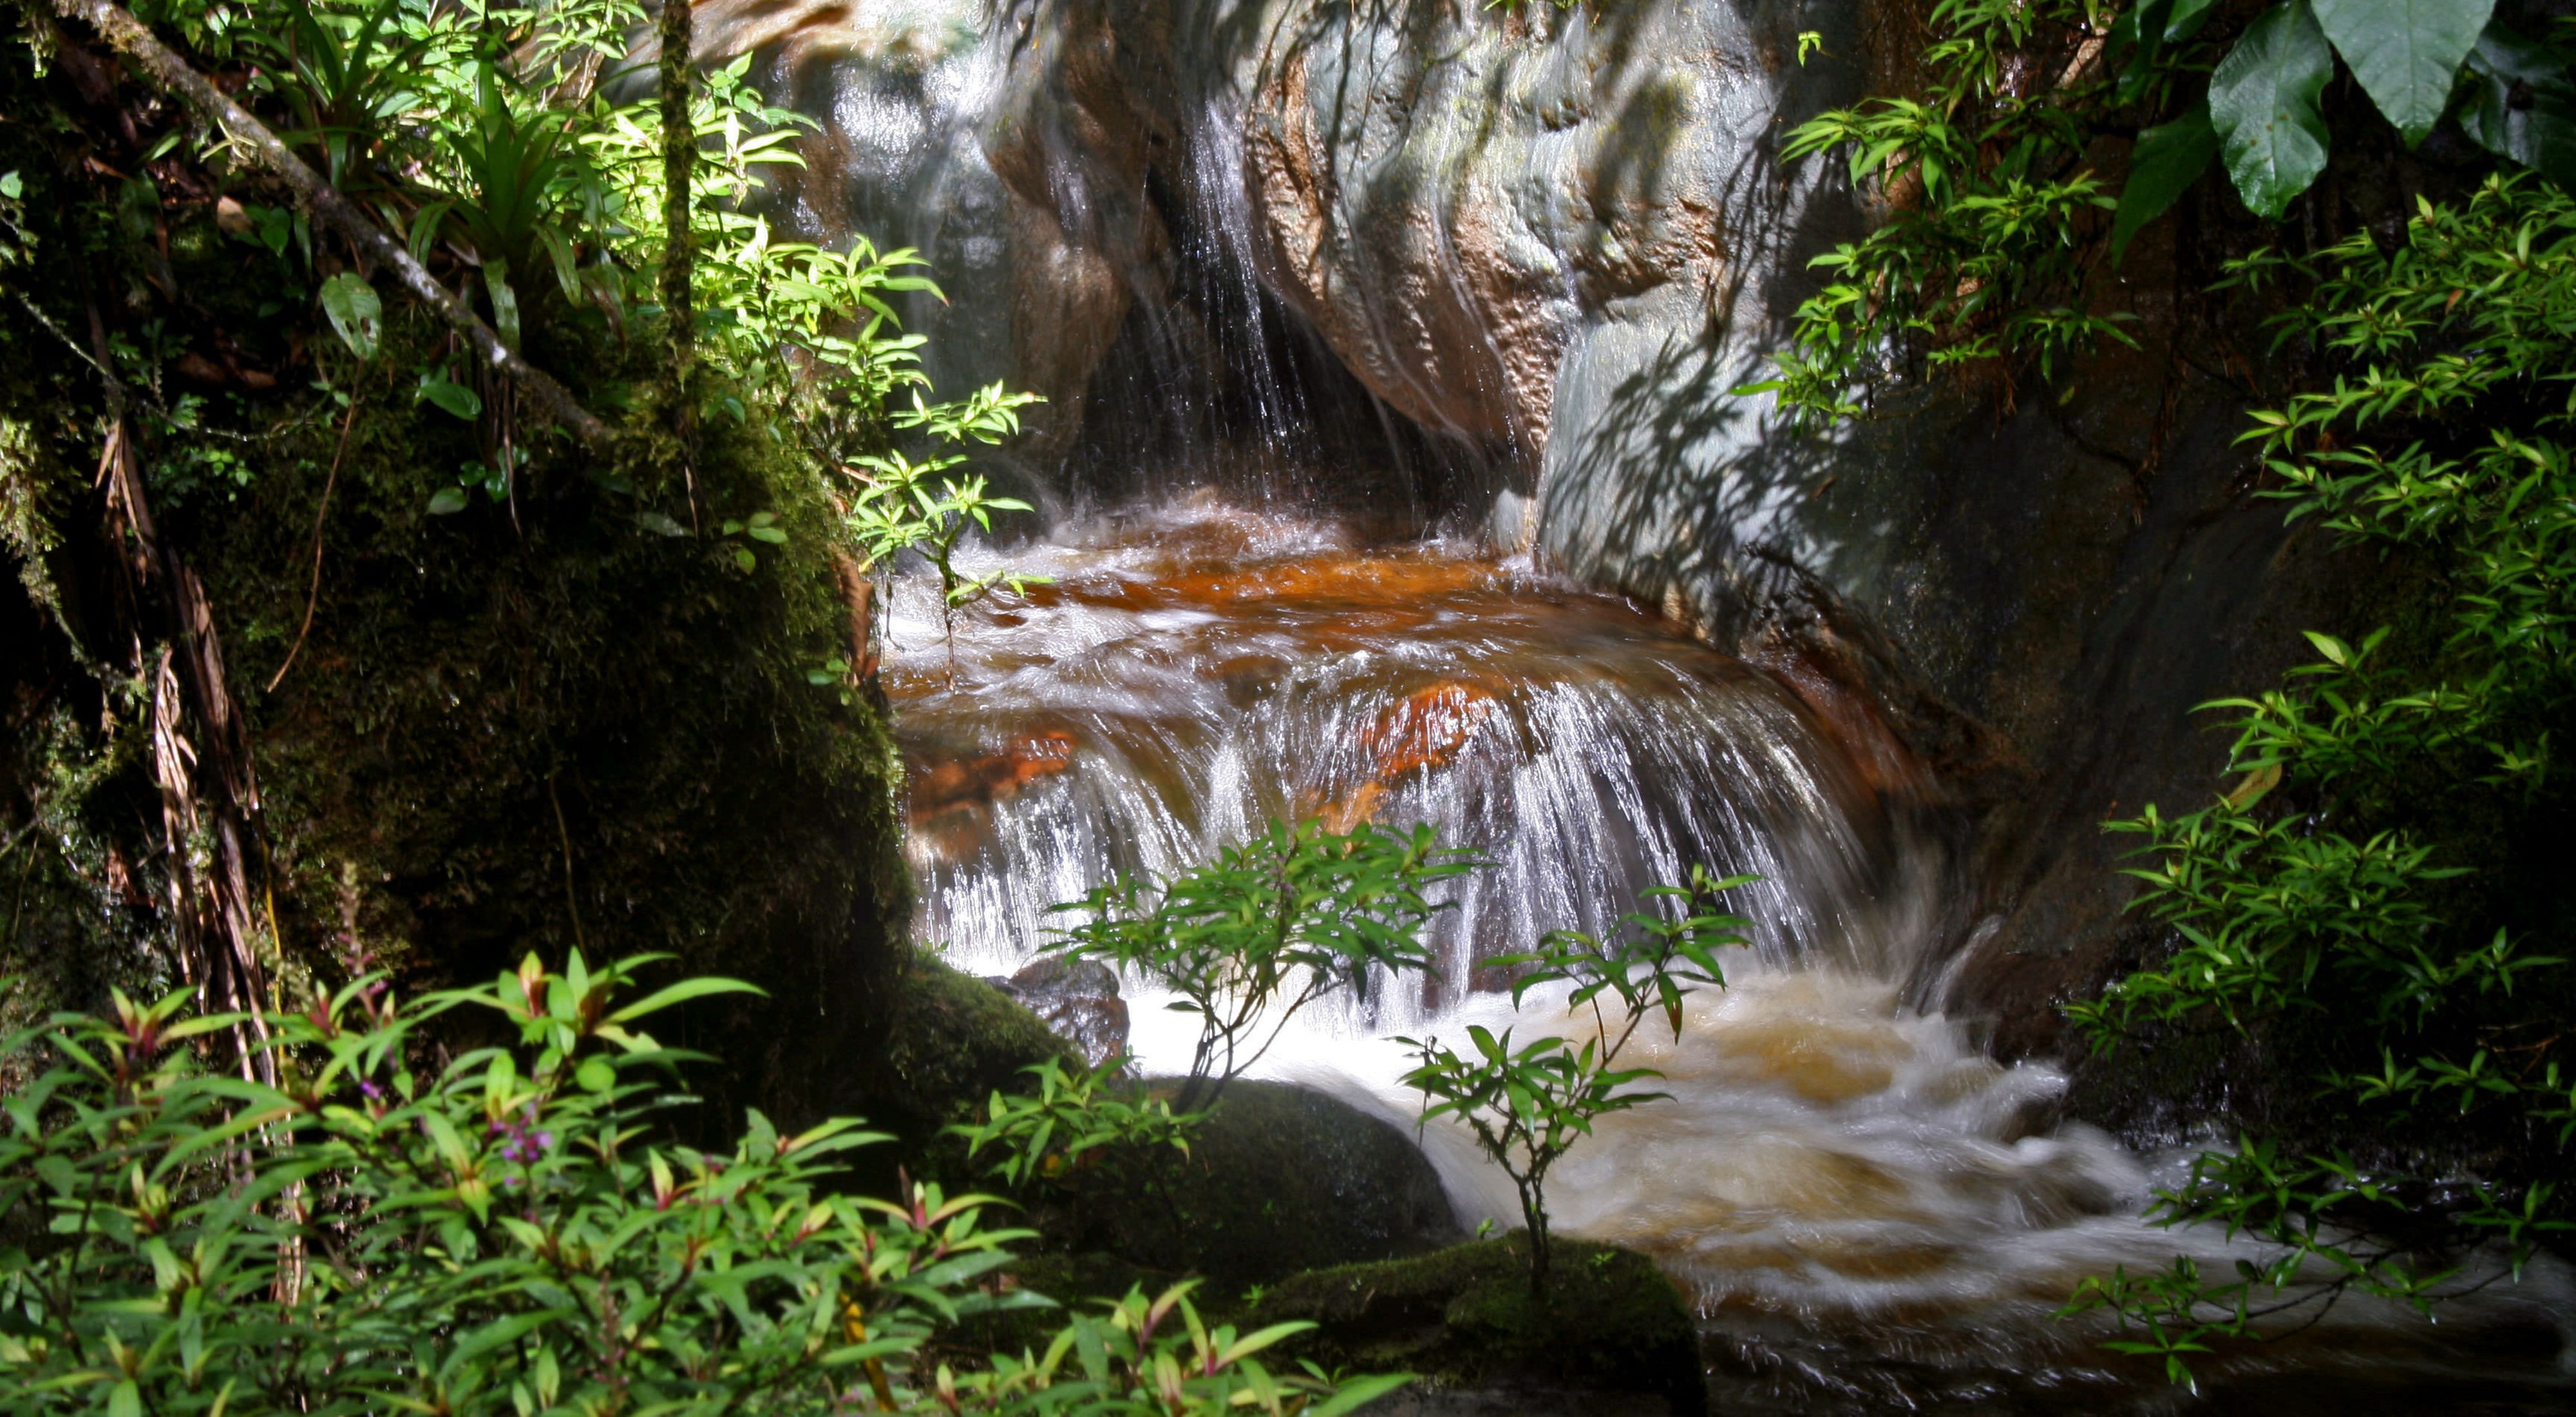 Paramos not only hold spectacular biological diversity, they also are intimately intertwined with the fate of Colombians as they hold water sources that feed Colombia's main cities and play a crucial role in the region's water regulation.